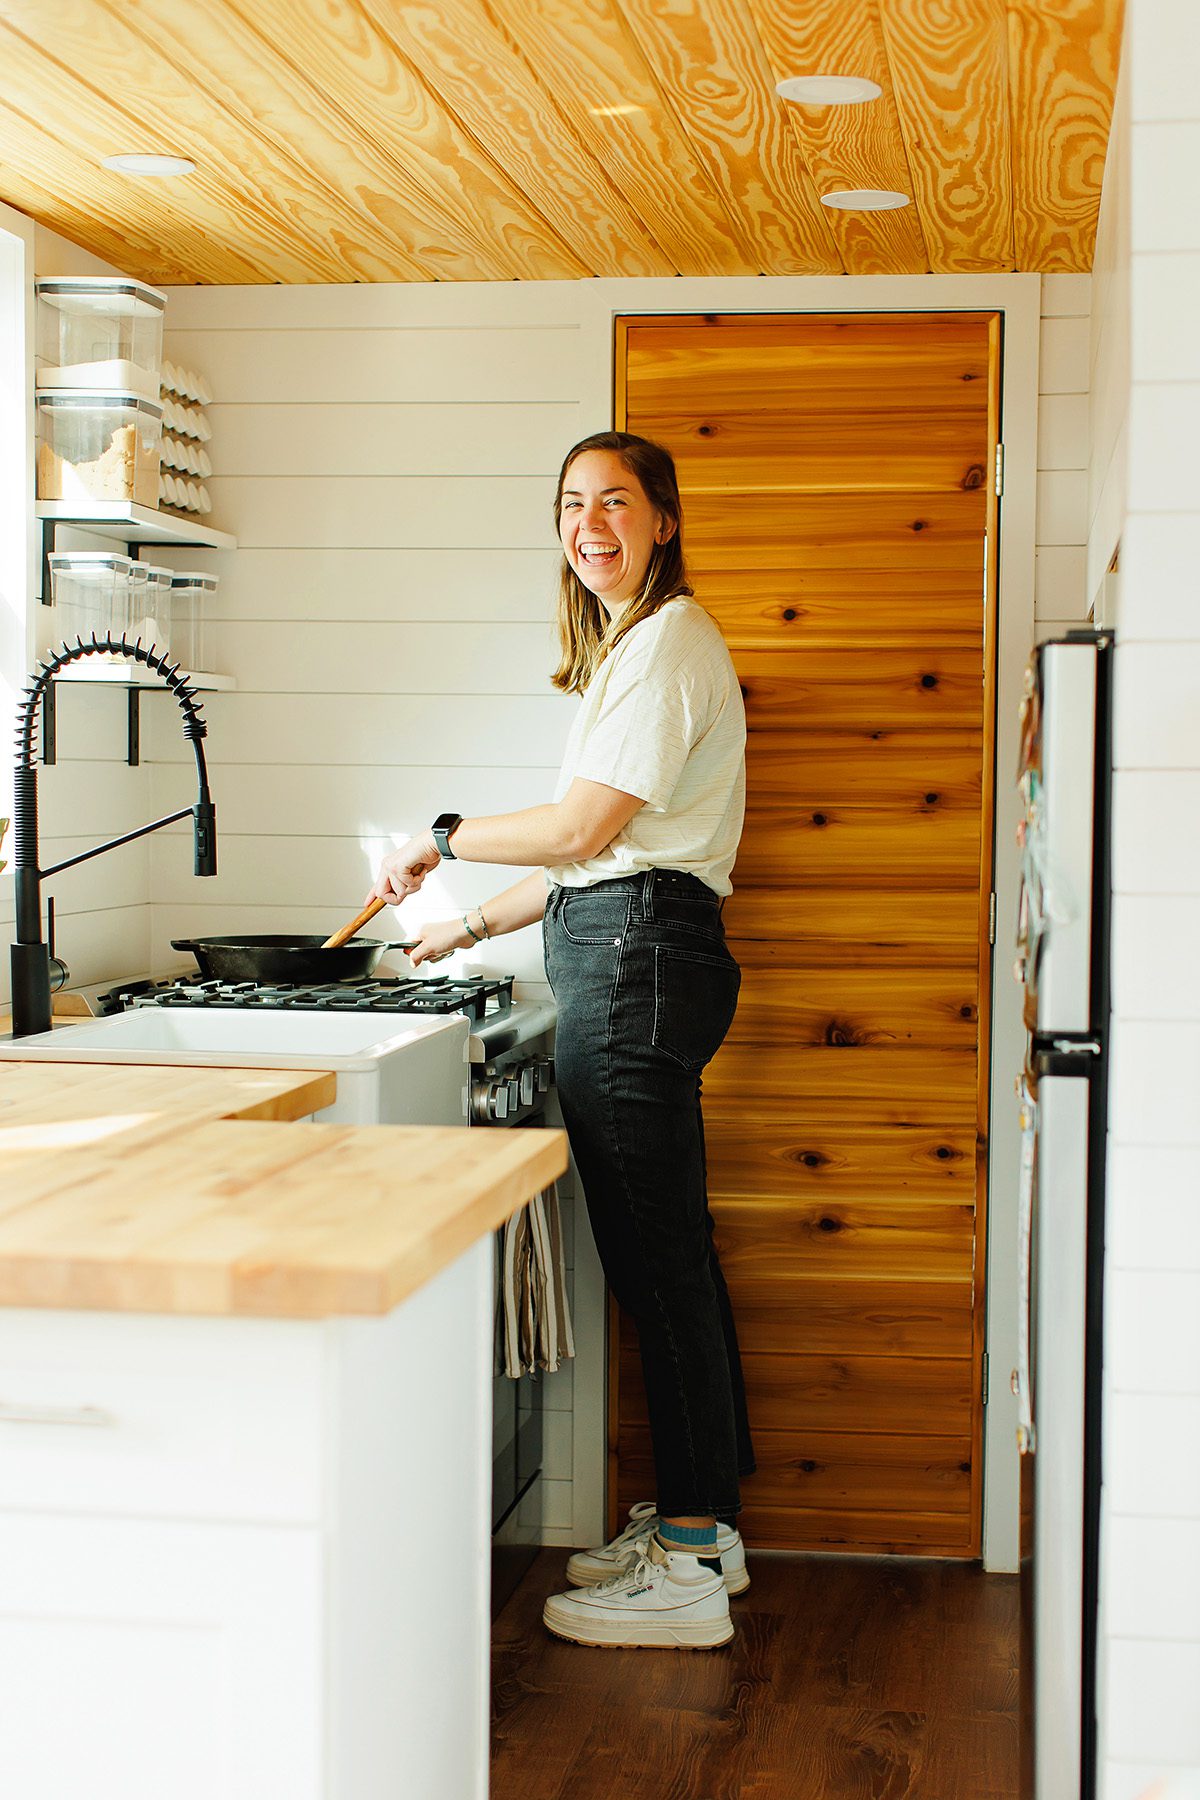 Emily Weyand, Dripping Springs High School math teacher, cooking in her tiny house